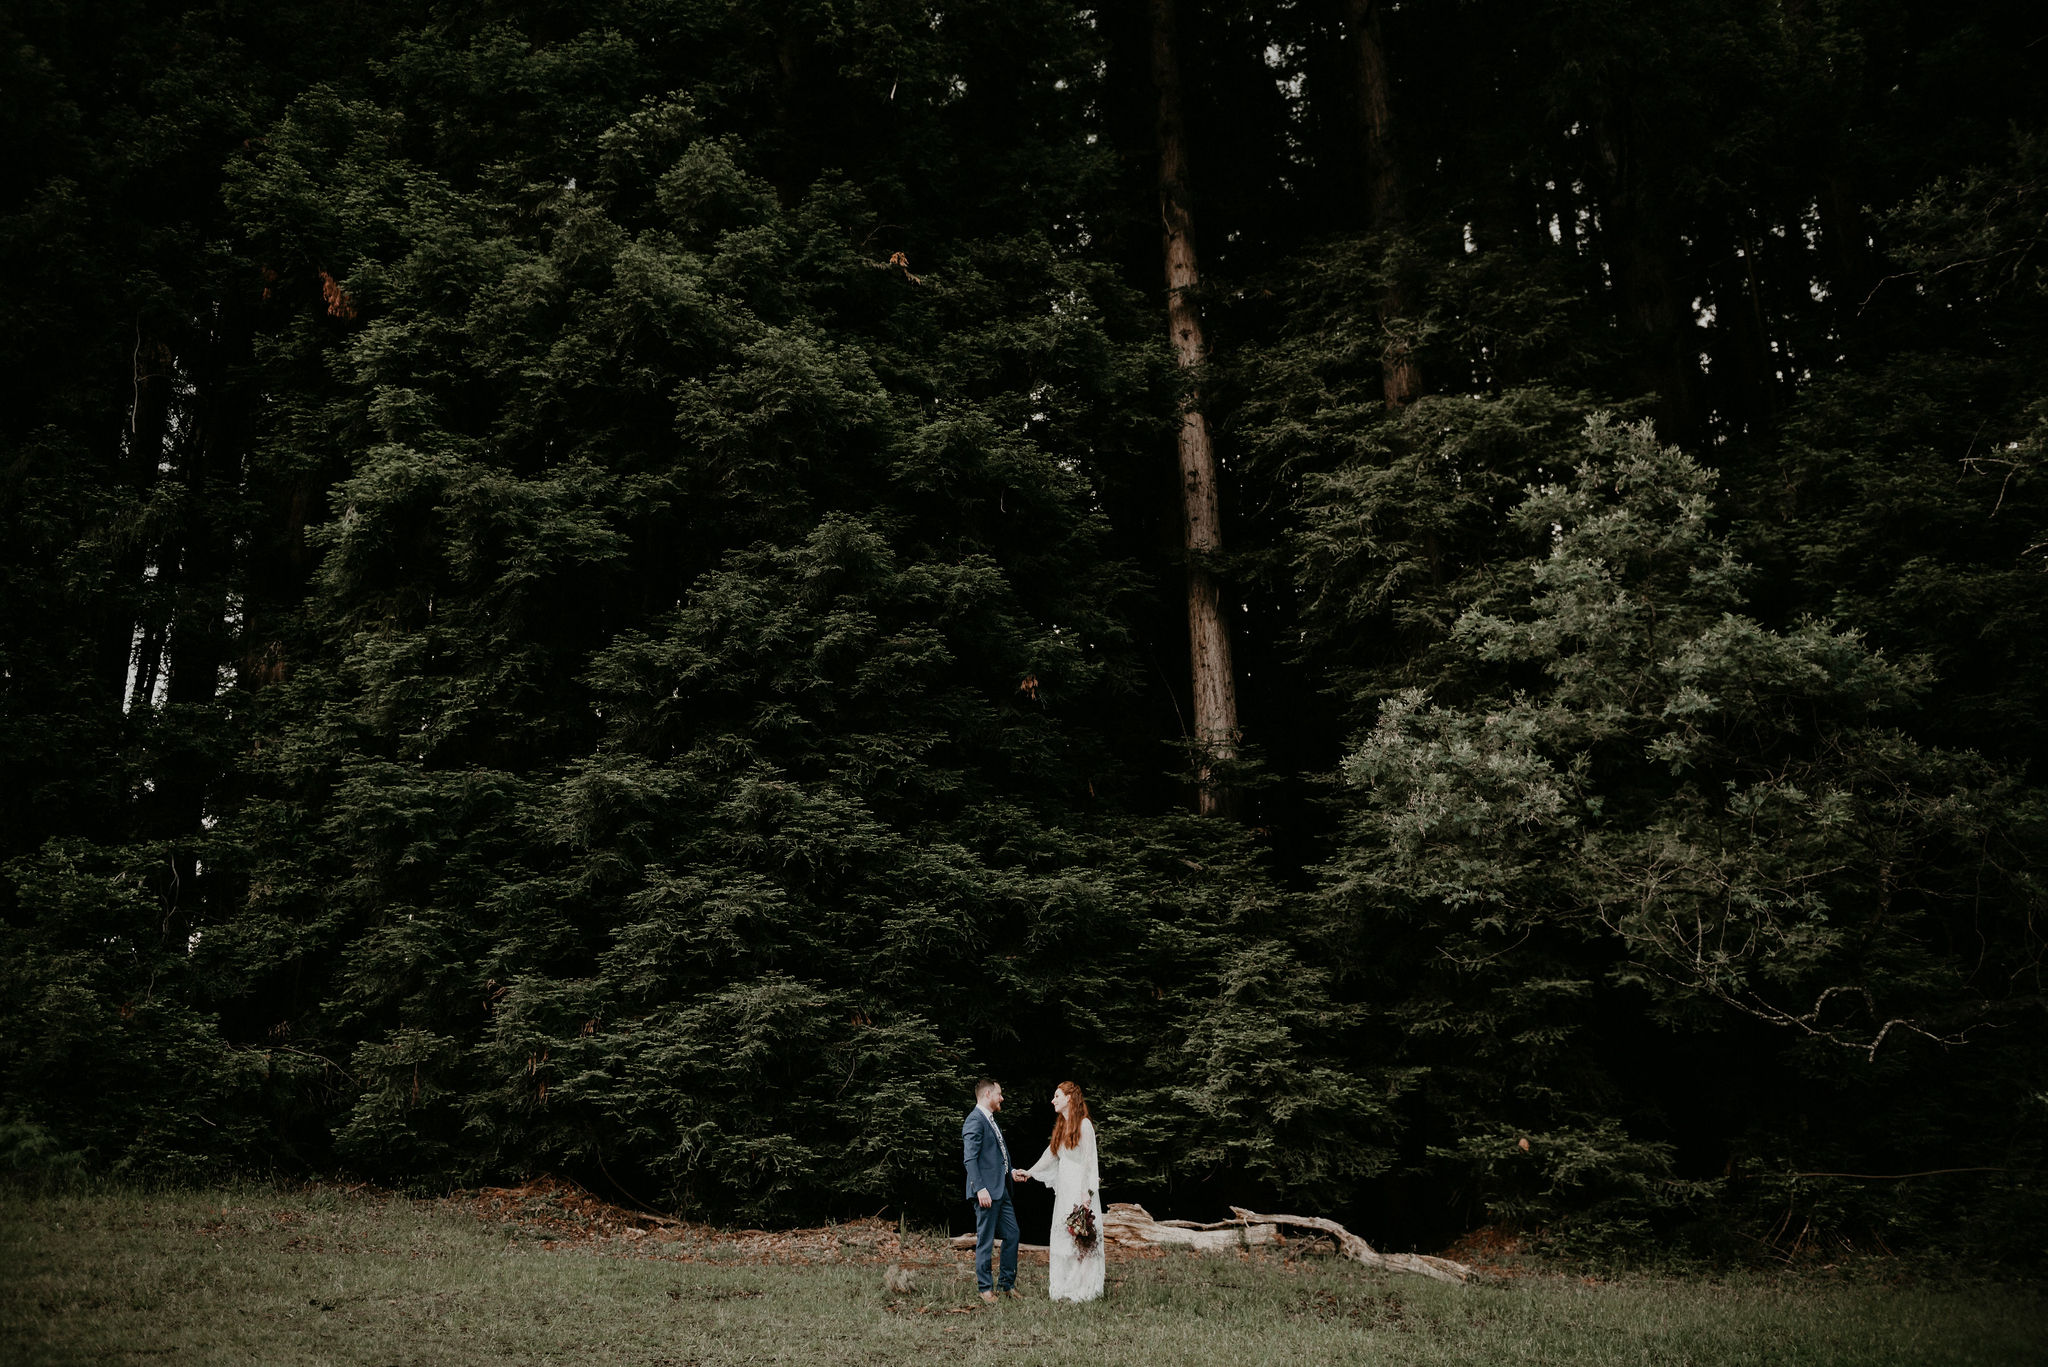 couple stands hold hands in front of tree line Warburton Redwood Forest Elopement Lets Elope Melbourne Celebrant Photographer Elopement Package Victoria Sarah Matler Photography Warburton Redwood Forest Yarra Valley weddings intimate